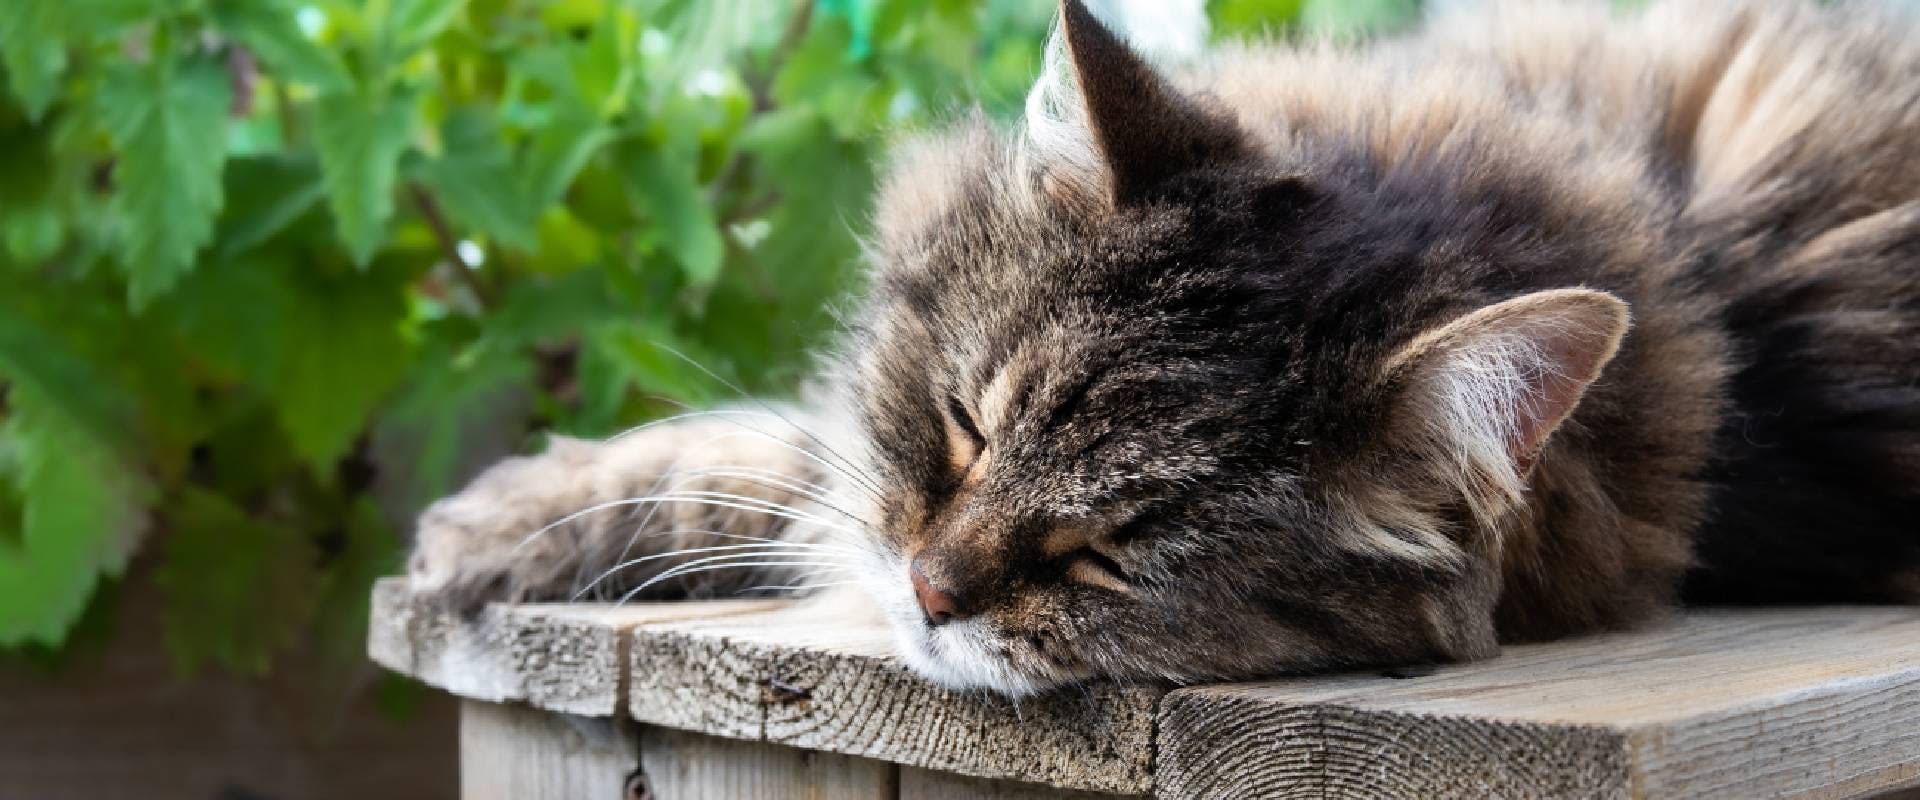 Cat sleeping on a bench in a catio